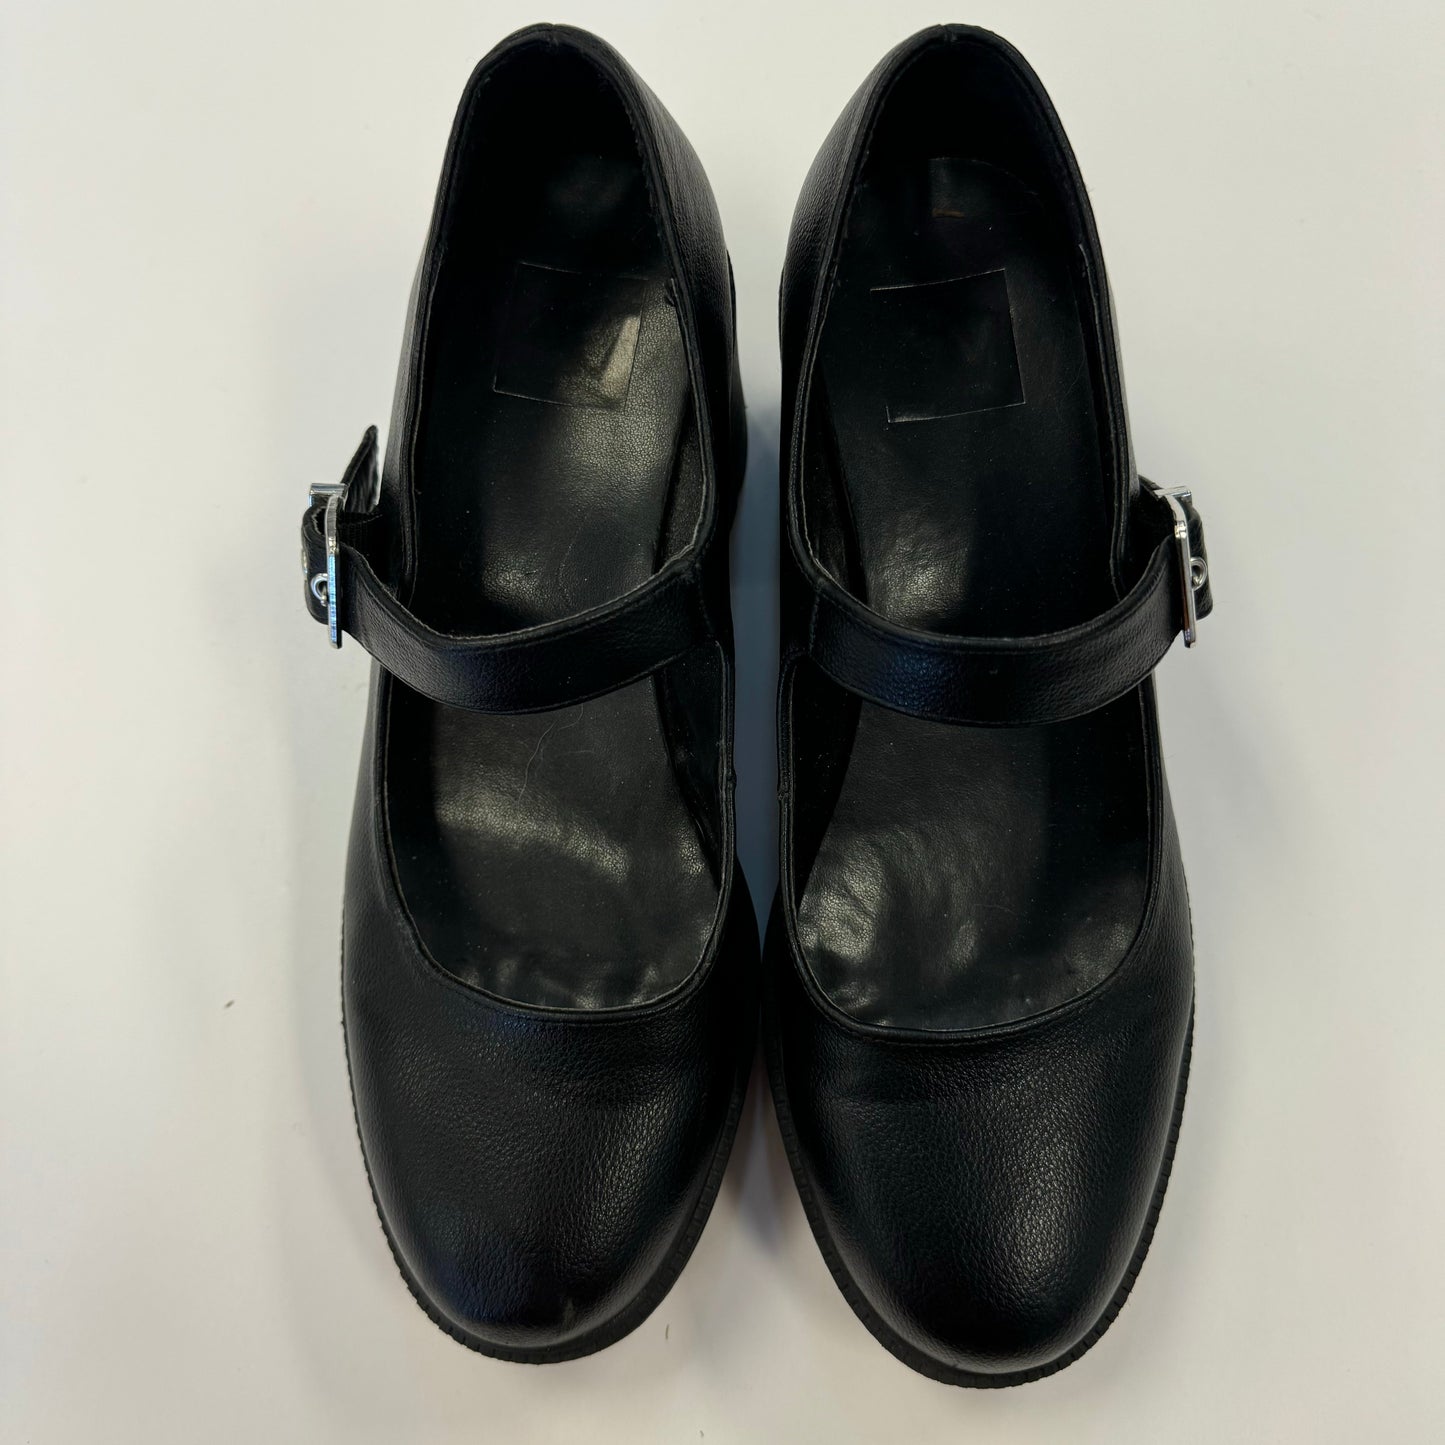 Black Shoes Sneakers Dolce Vita, Size 8